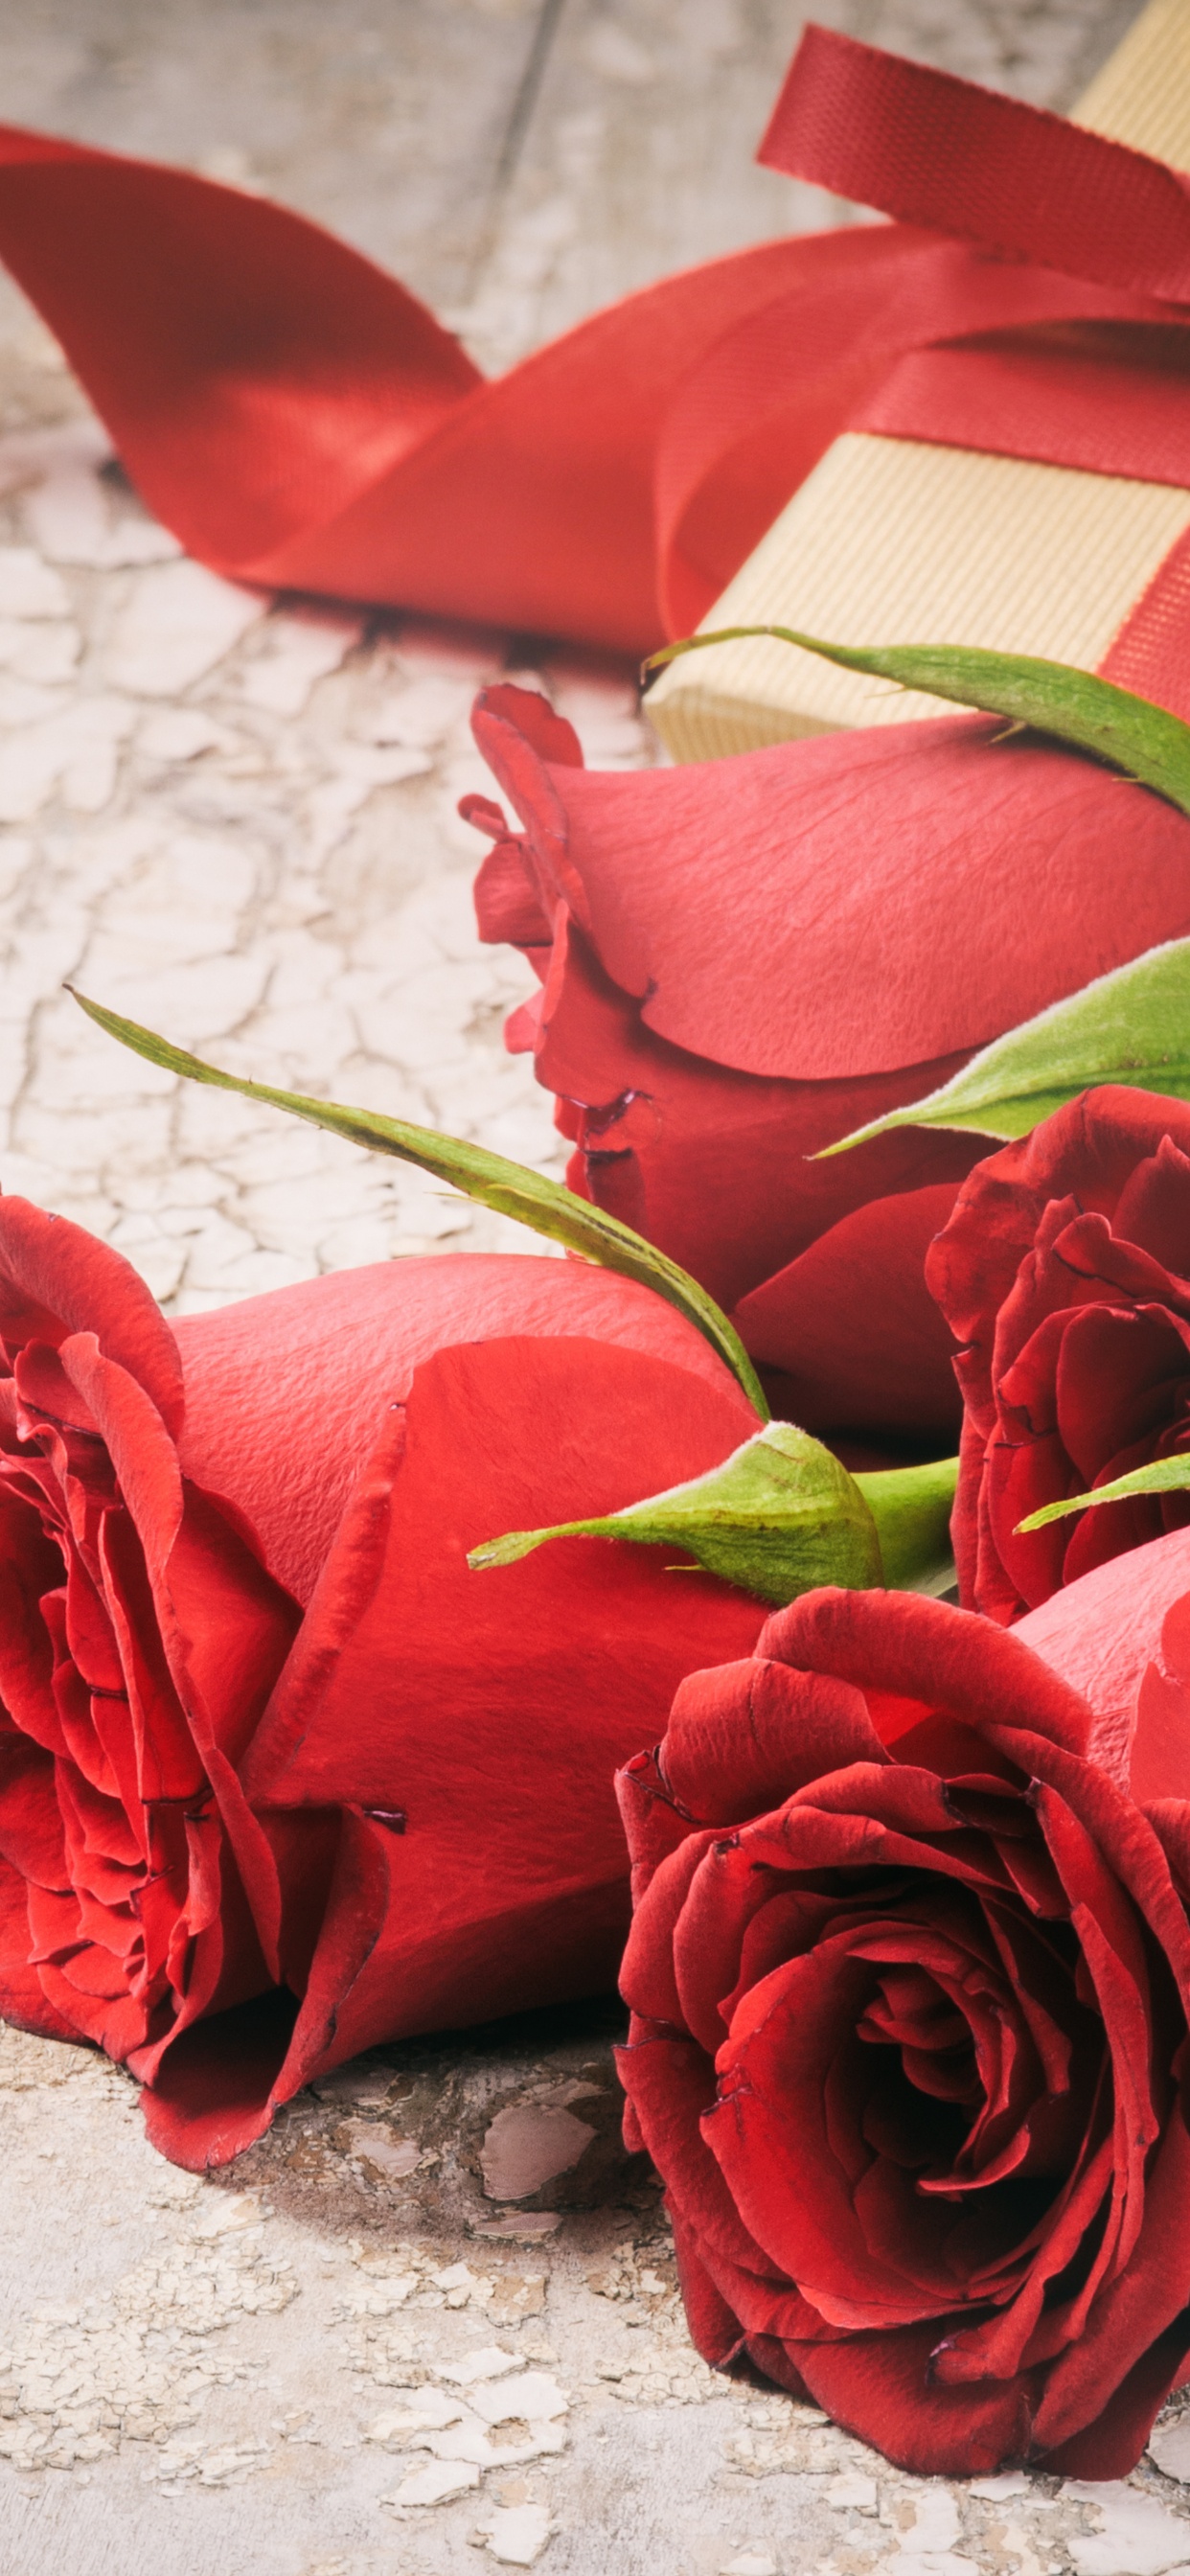 Red Roses on White Textile. Wallpaper in 1242x2688 Resolution